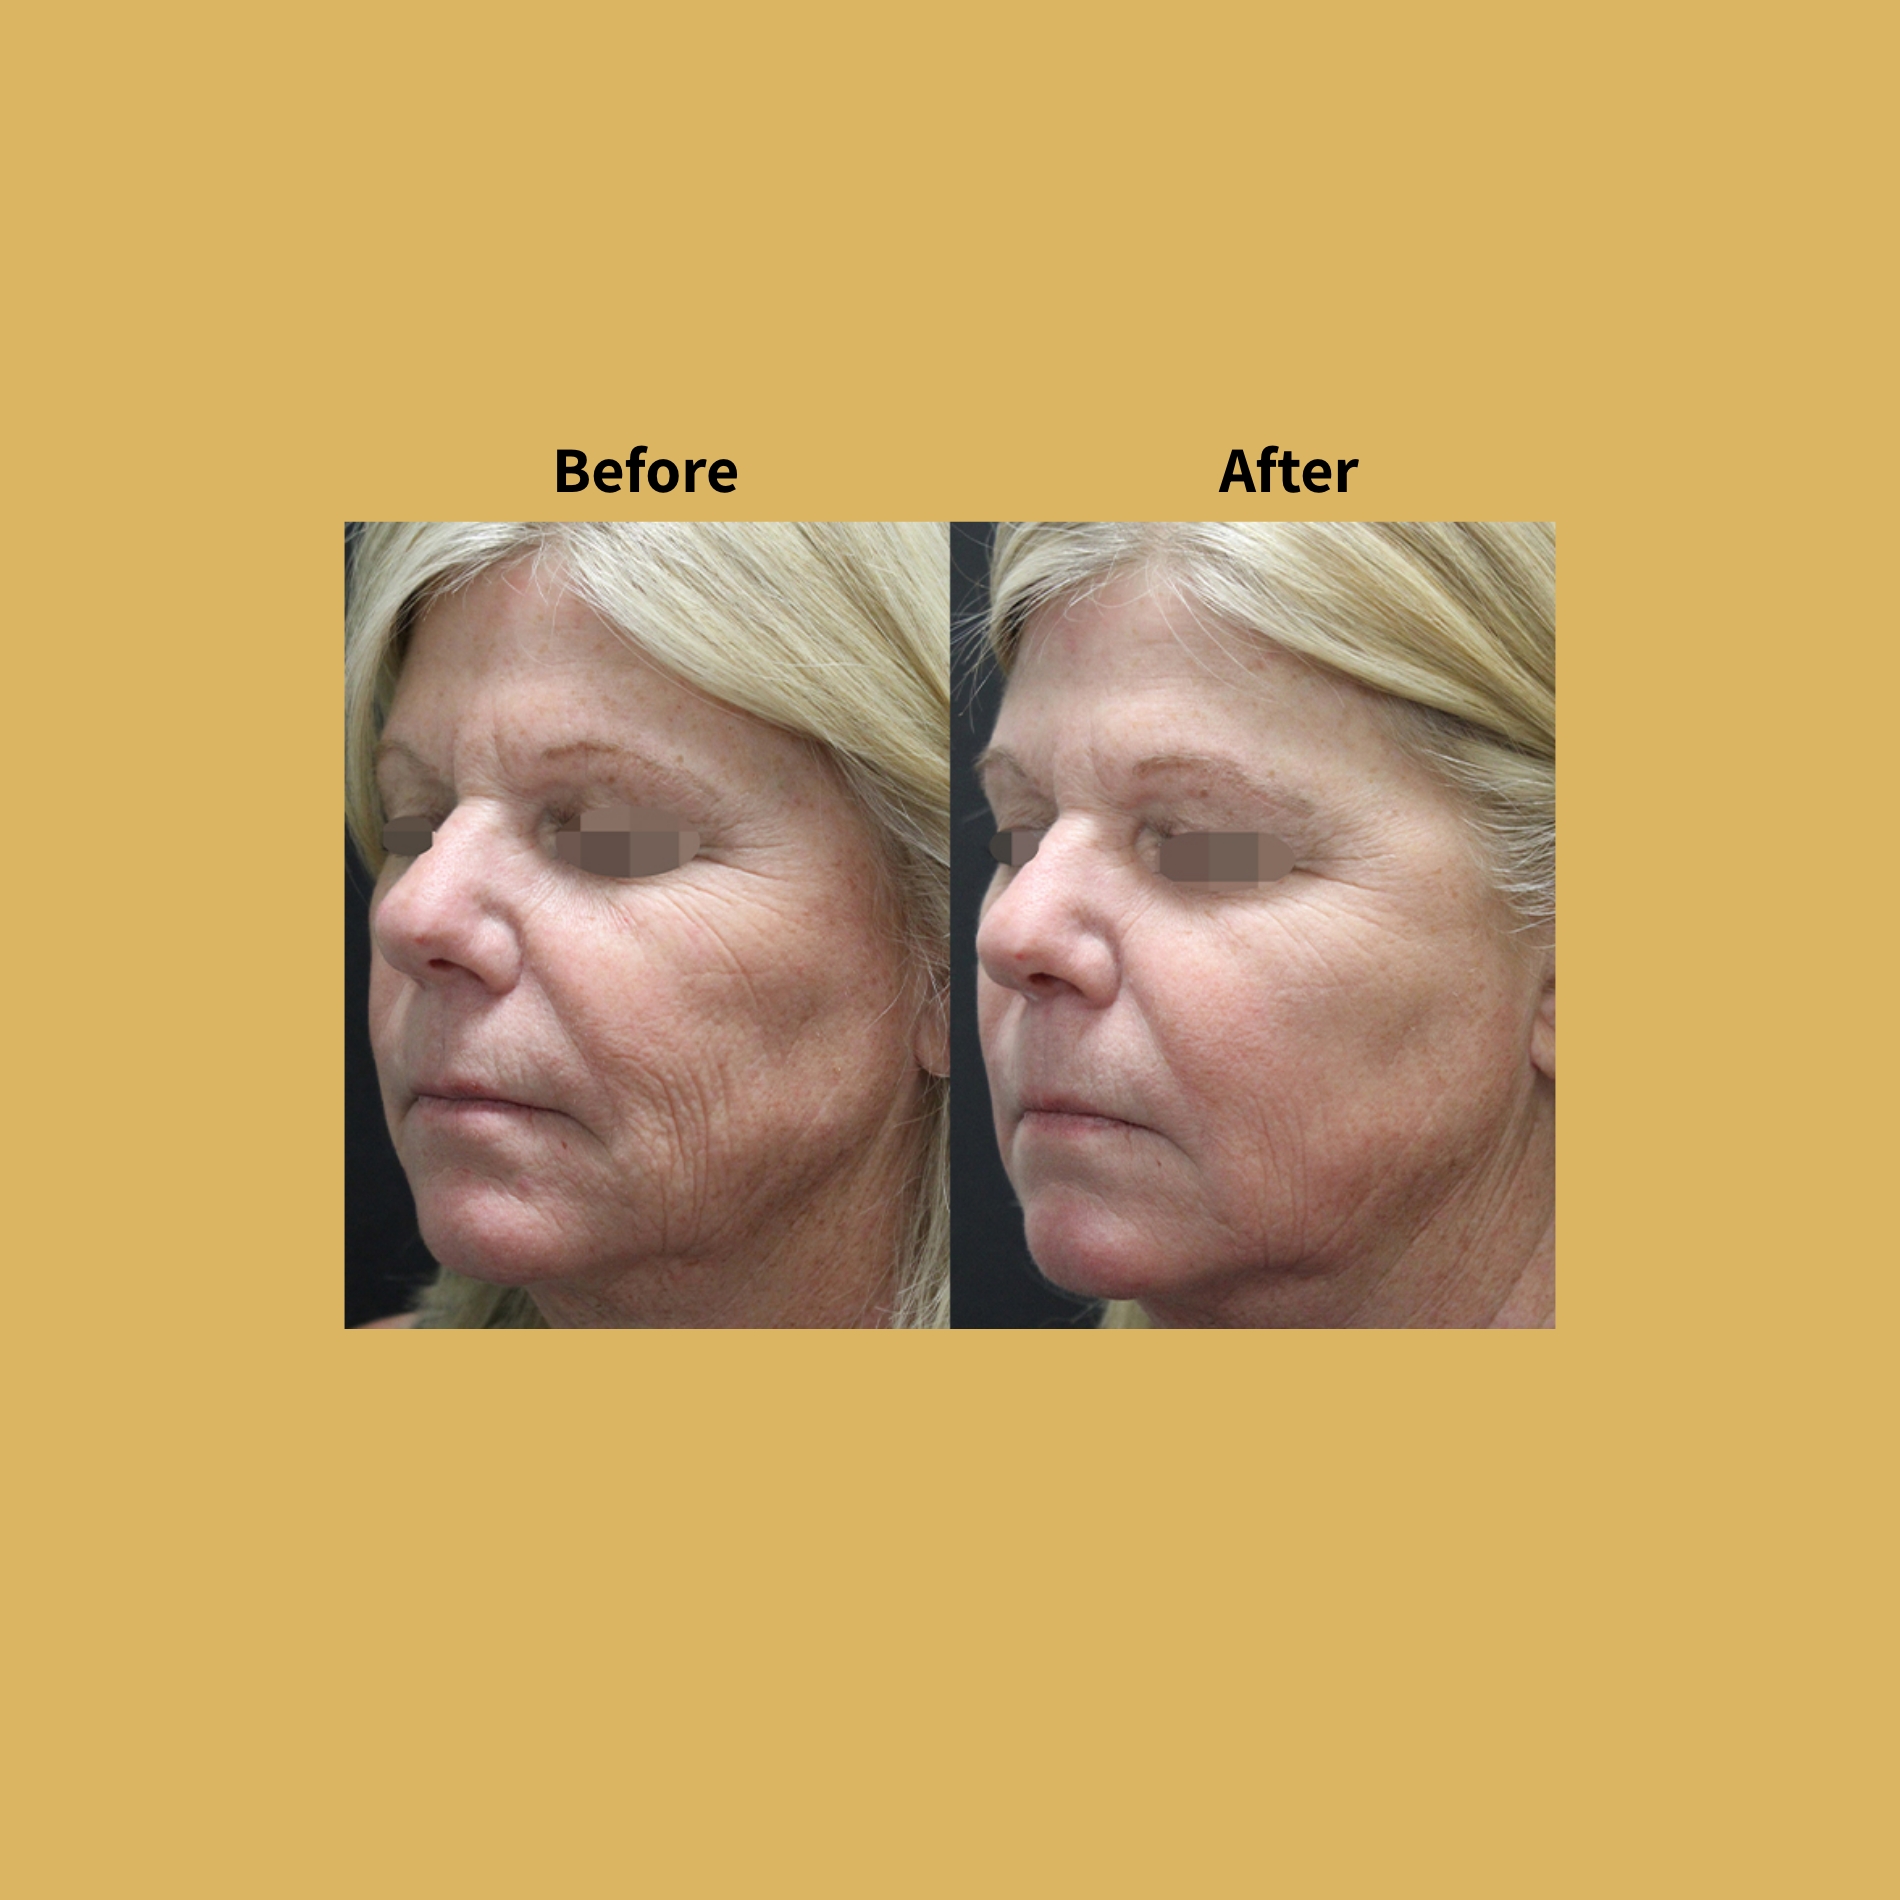 Opus Plasma Before and After Treatment Photos | Soleil Medical & Beauty Spa in Portland, OR